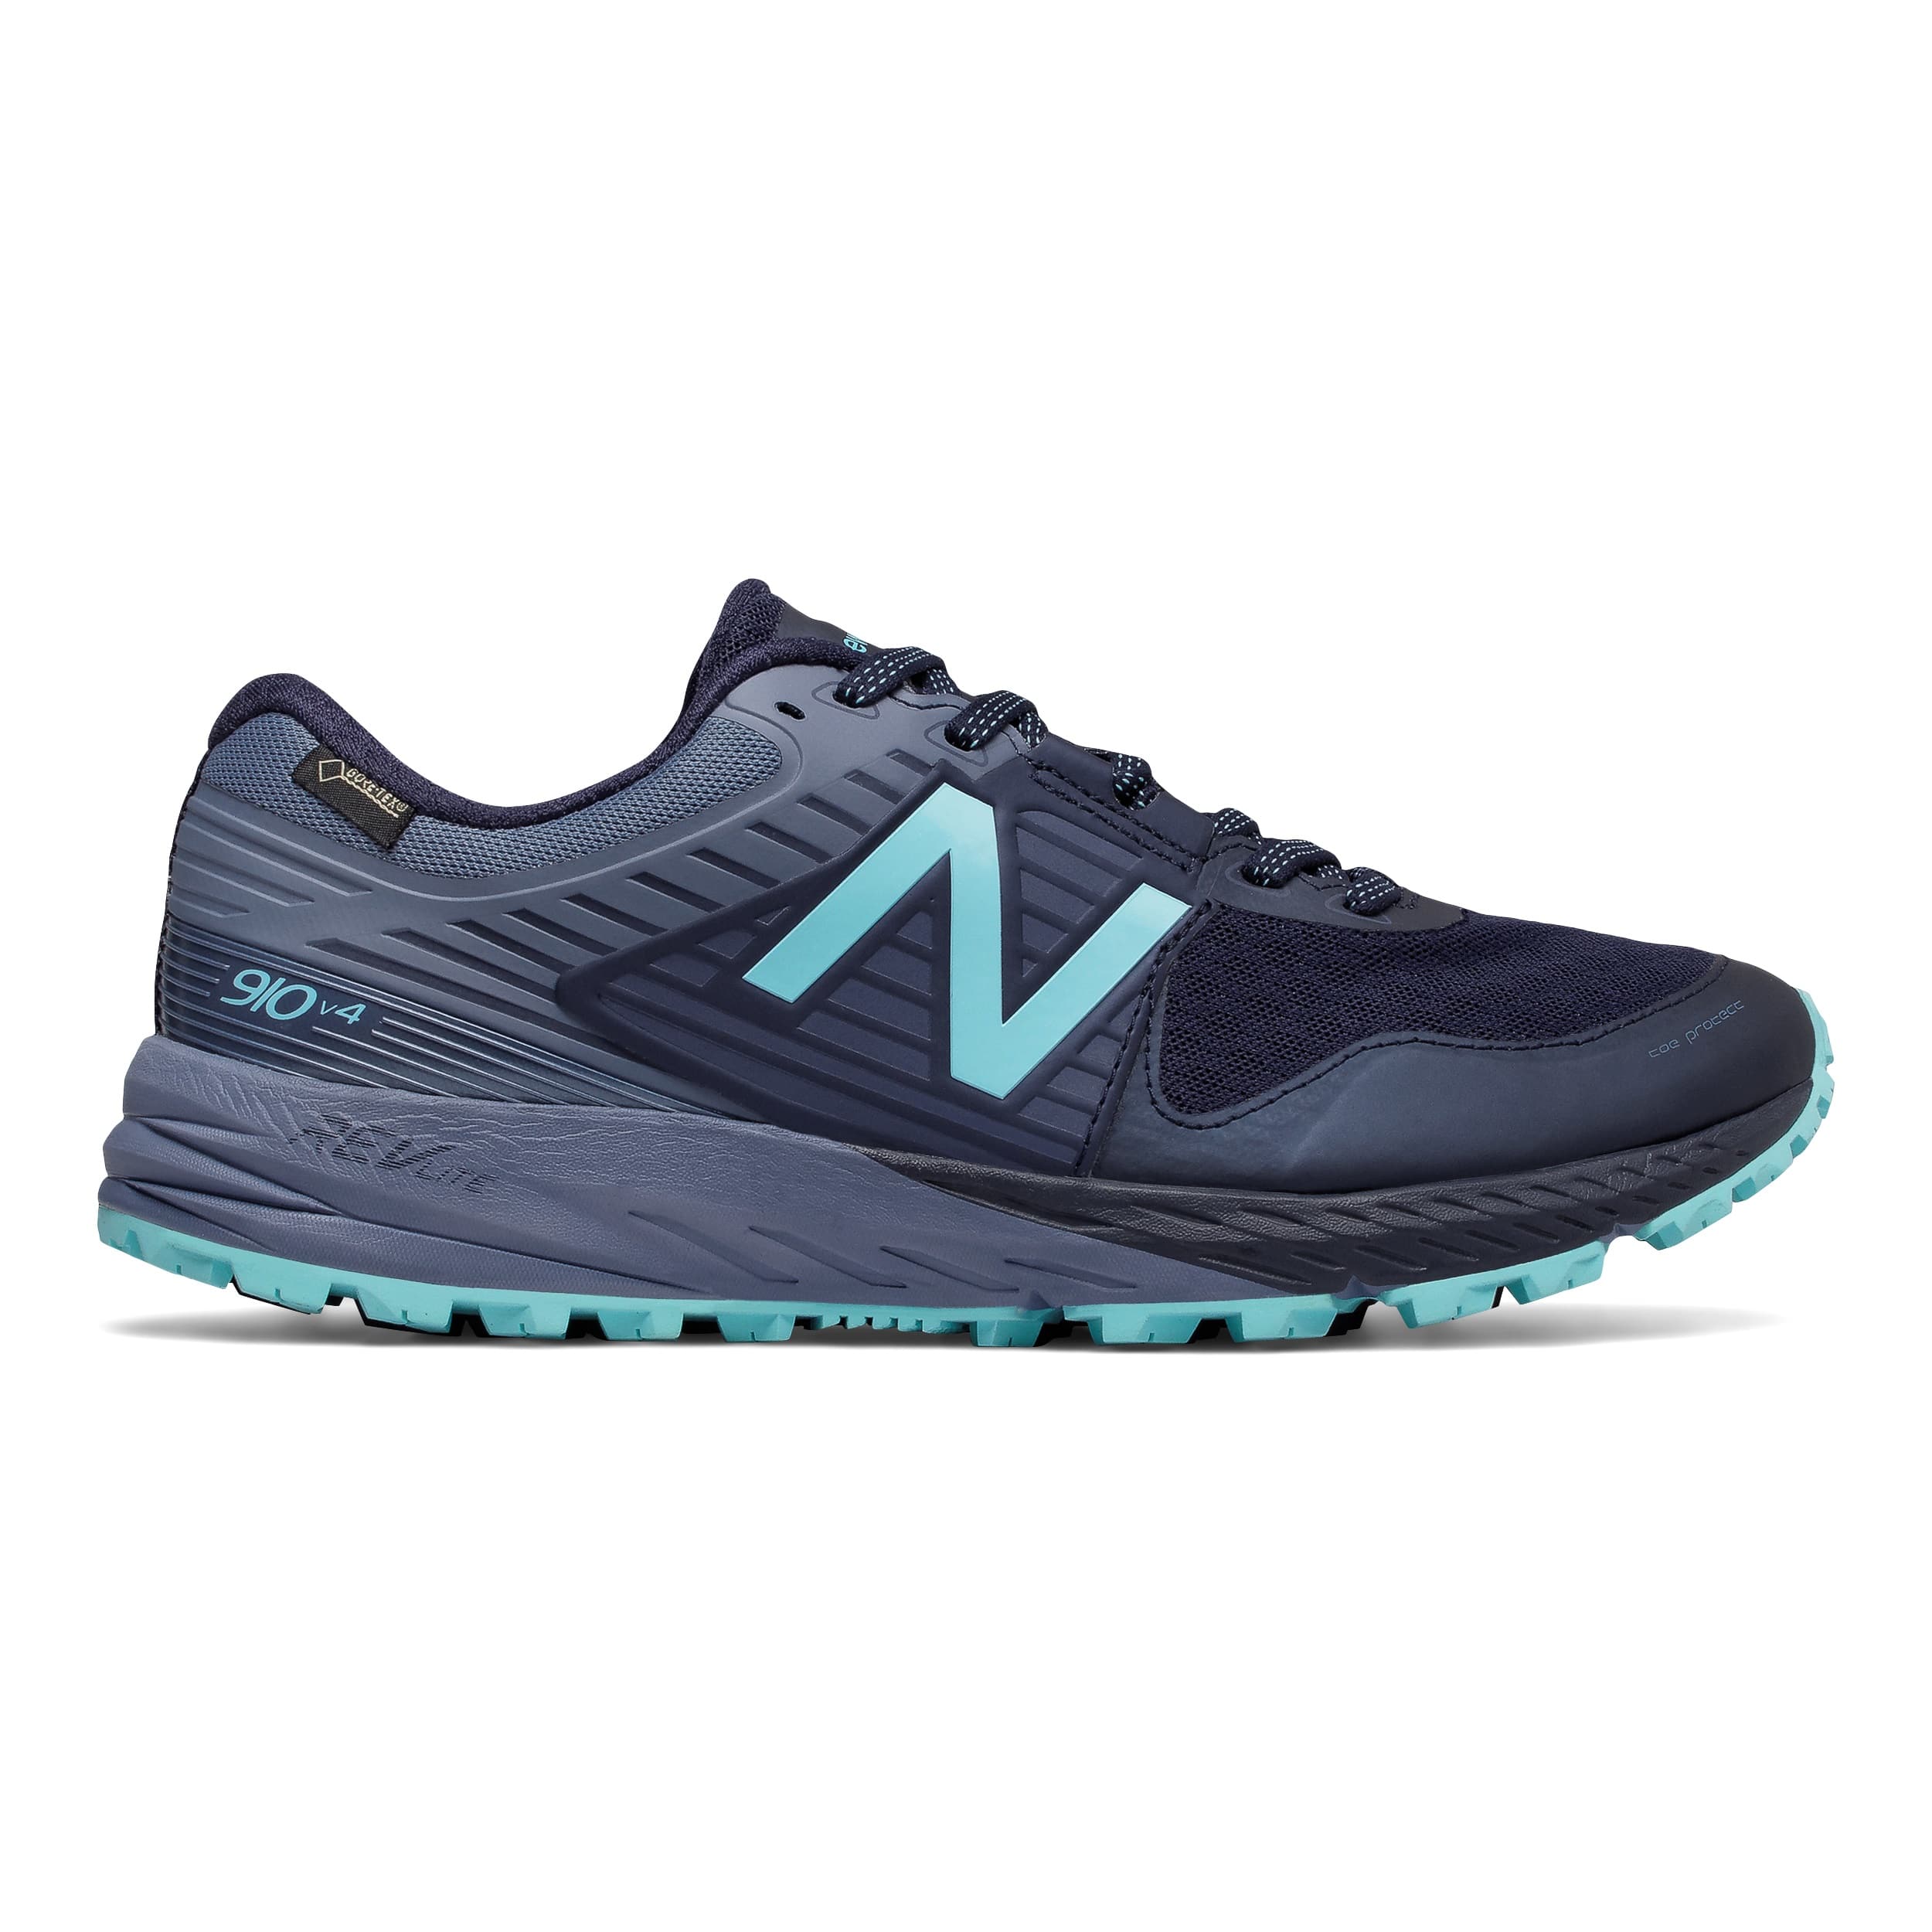 Buy New Balance 910v4 Trail GORE-TEX Women's from Outnorth